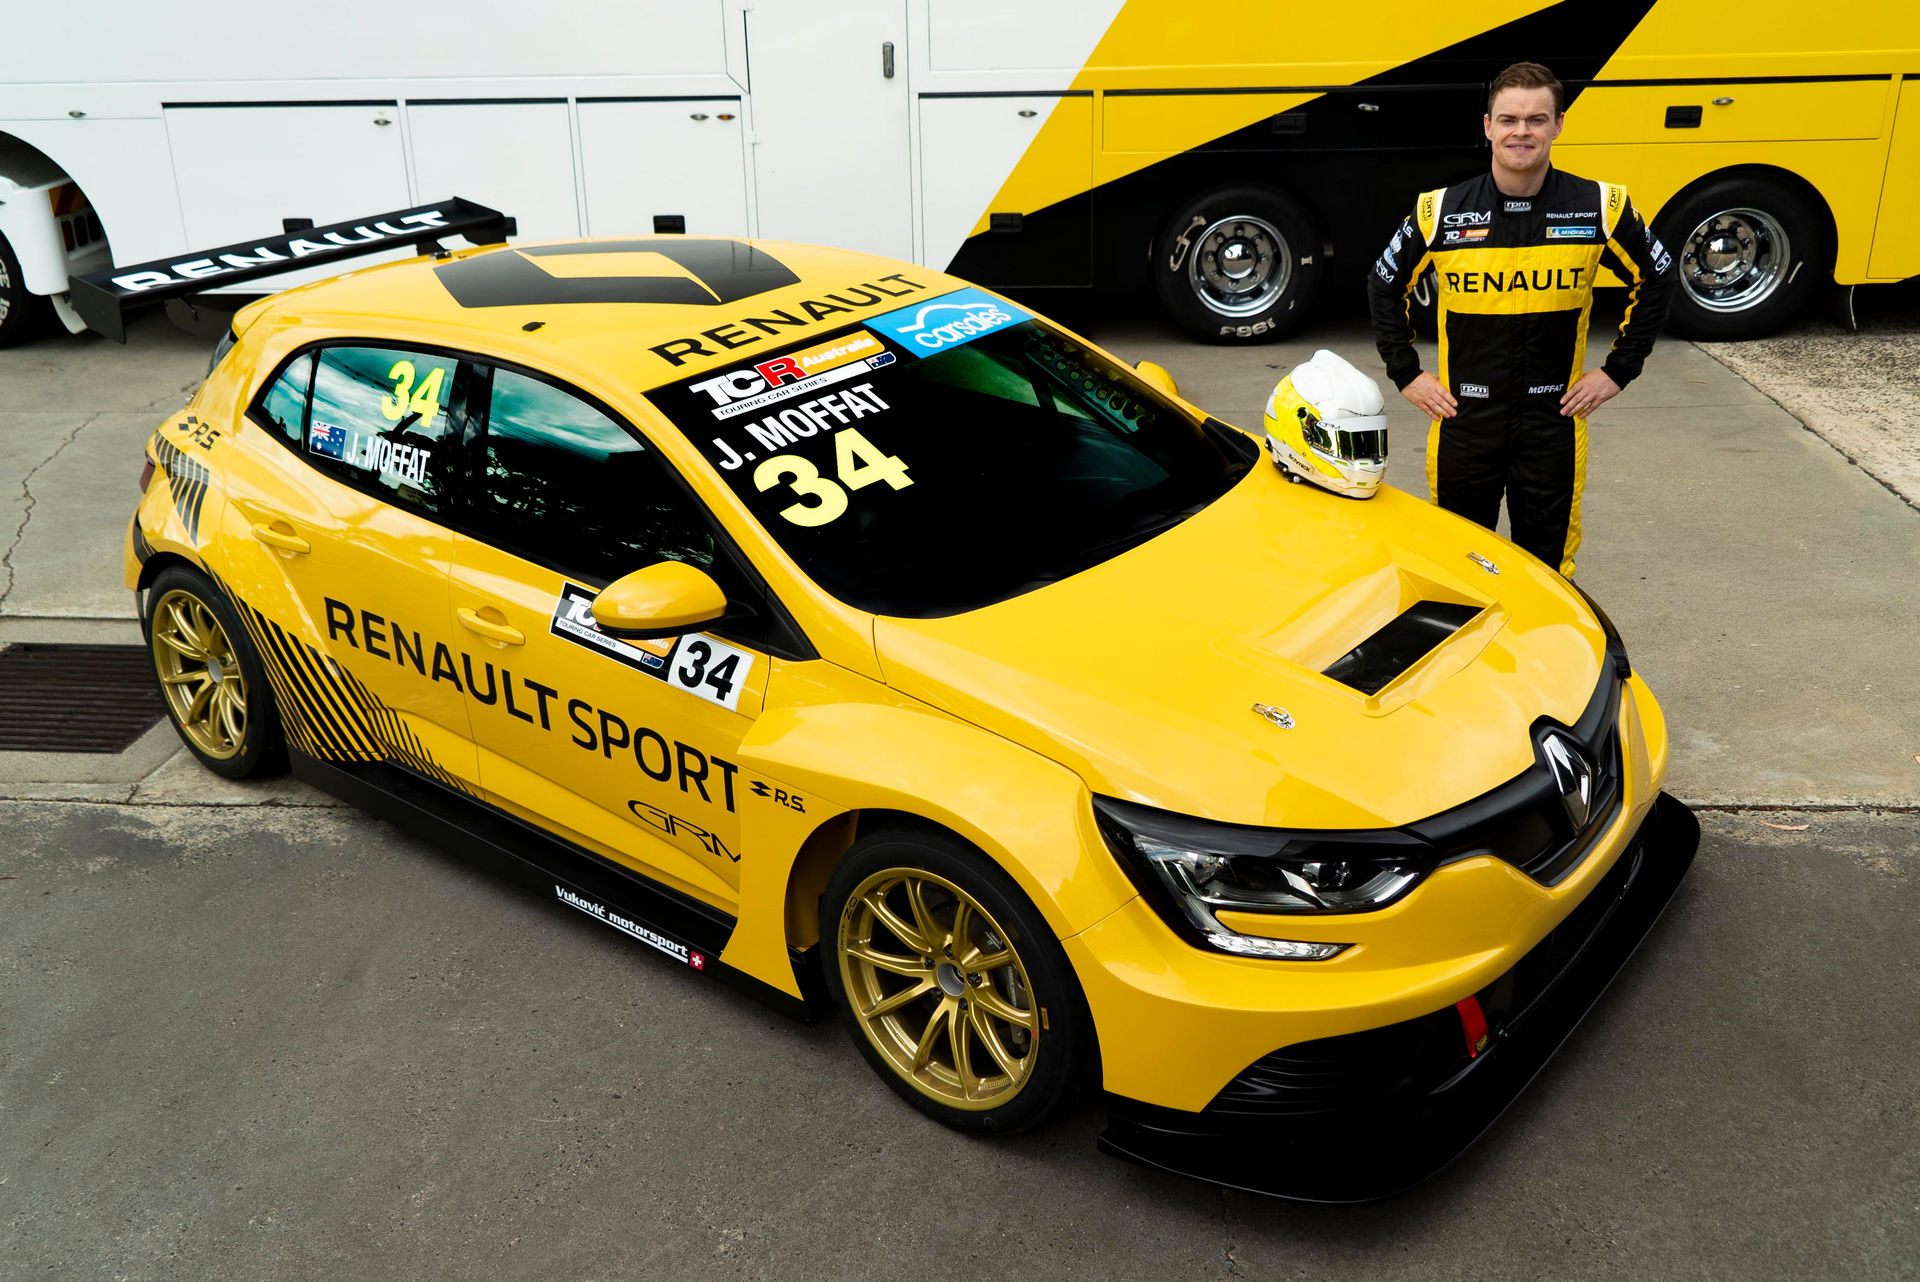 2020 Renault Megane R S Tcr Racer Unveiled In Australia Carscoops